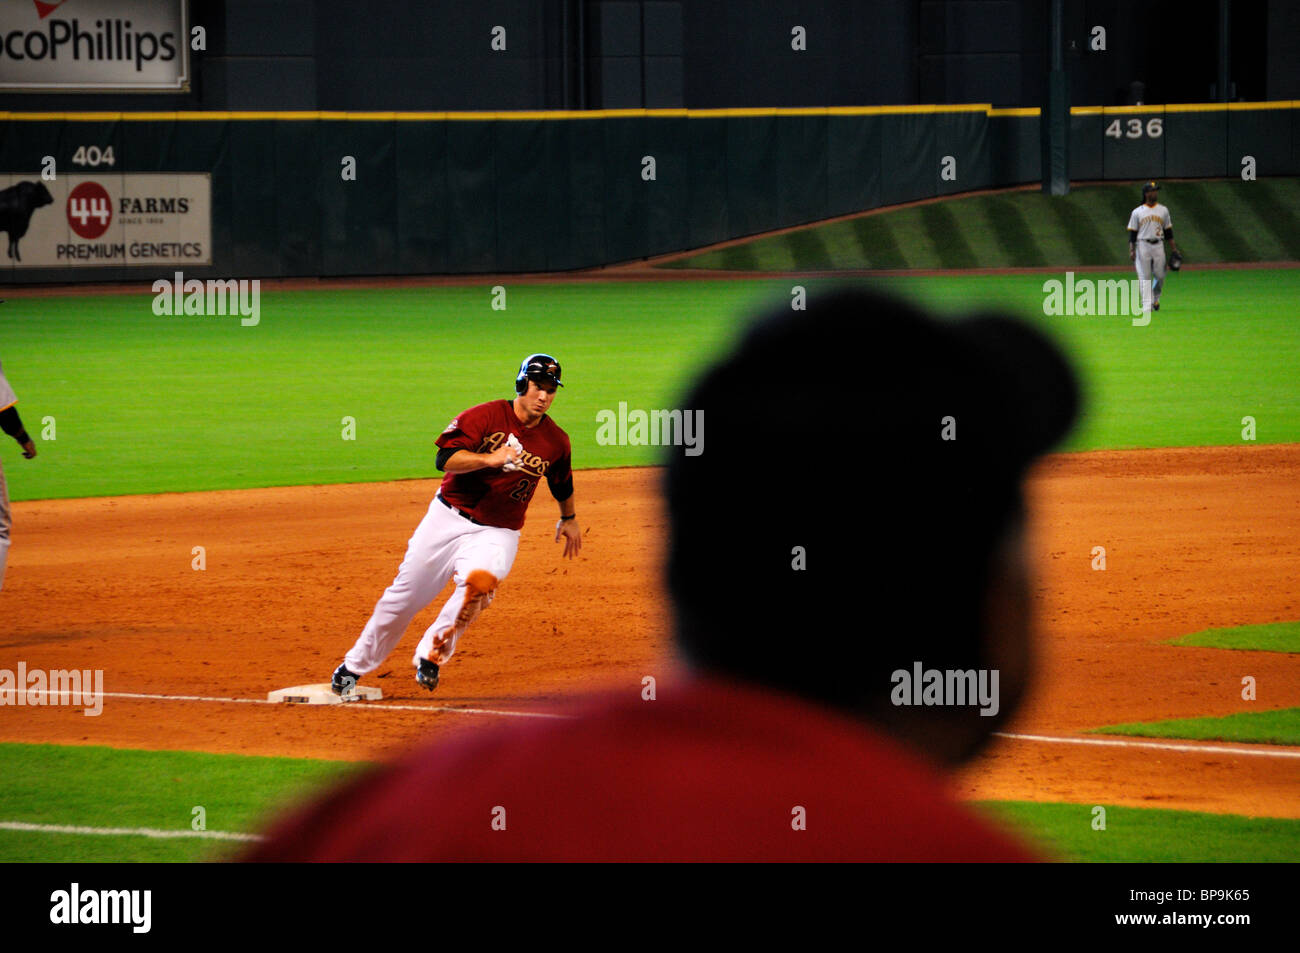 An Astro player running home from third base. Houston, Texas, USA. Stock Photo